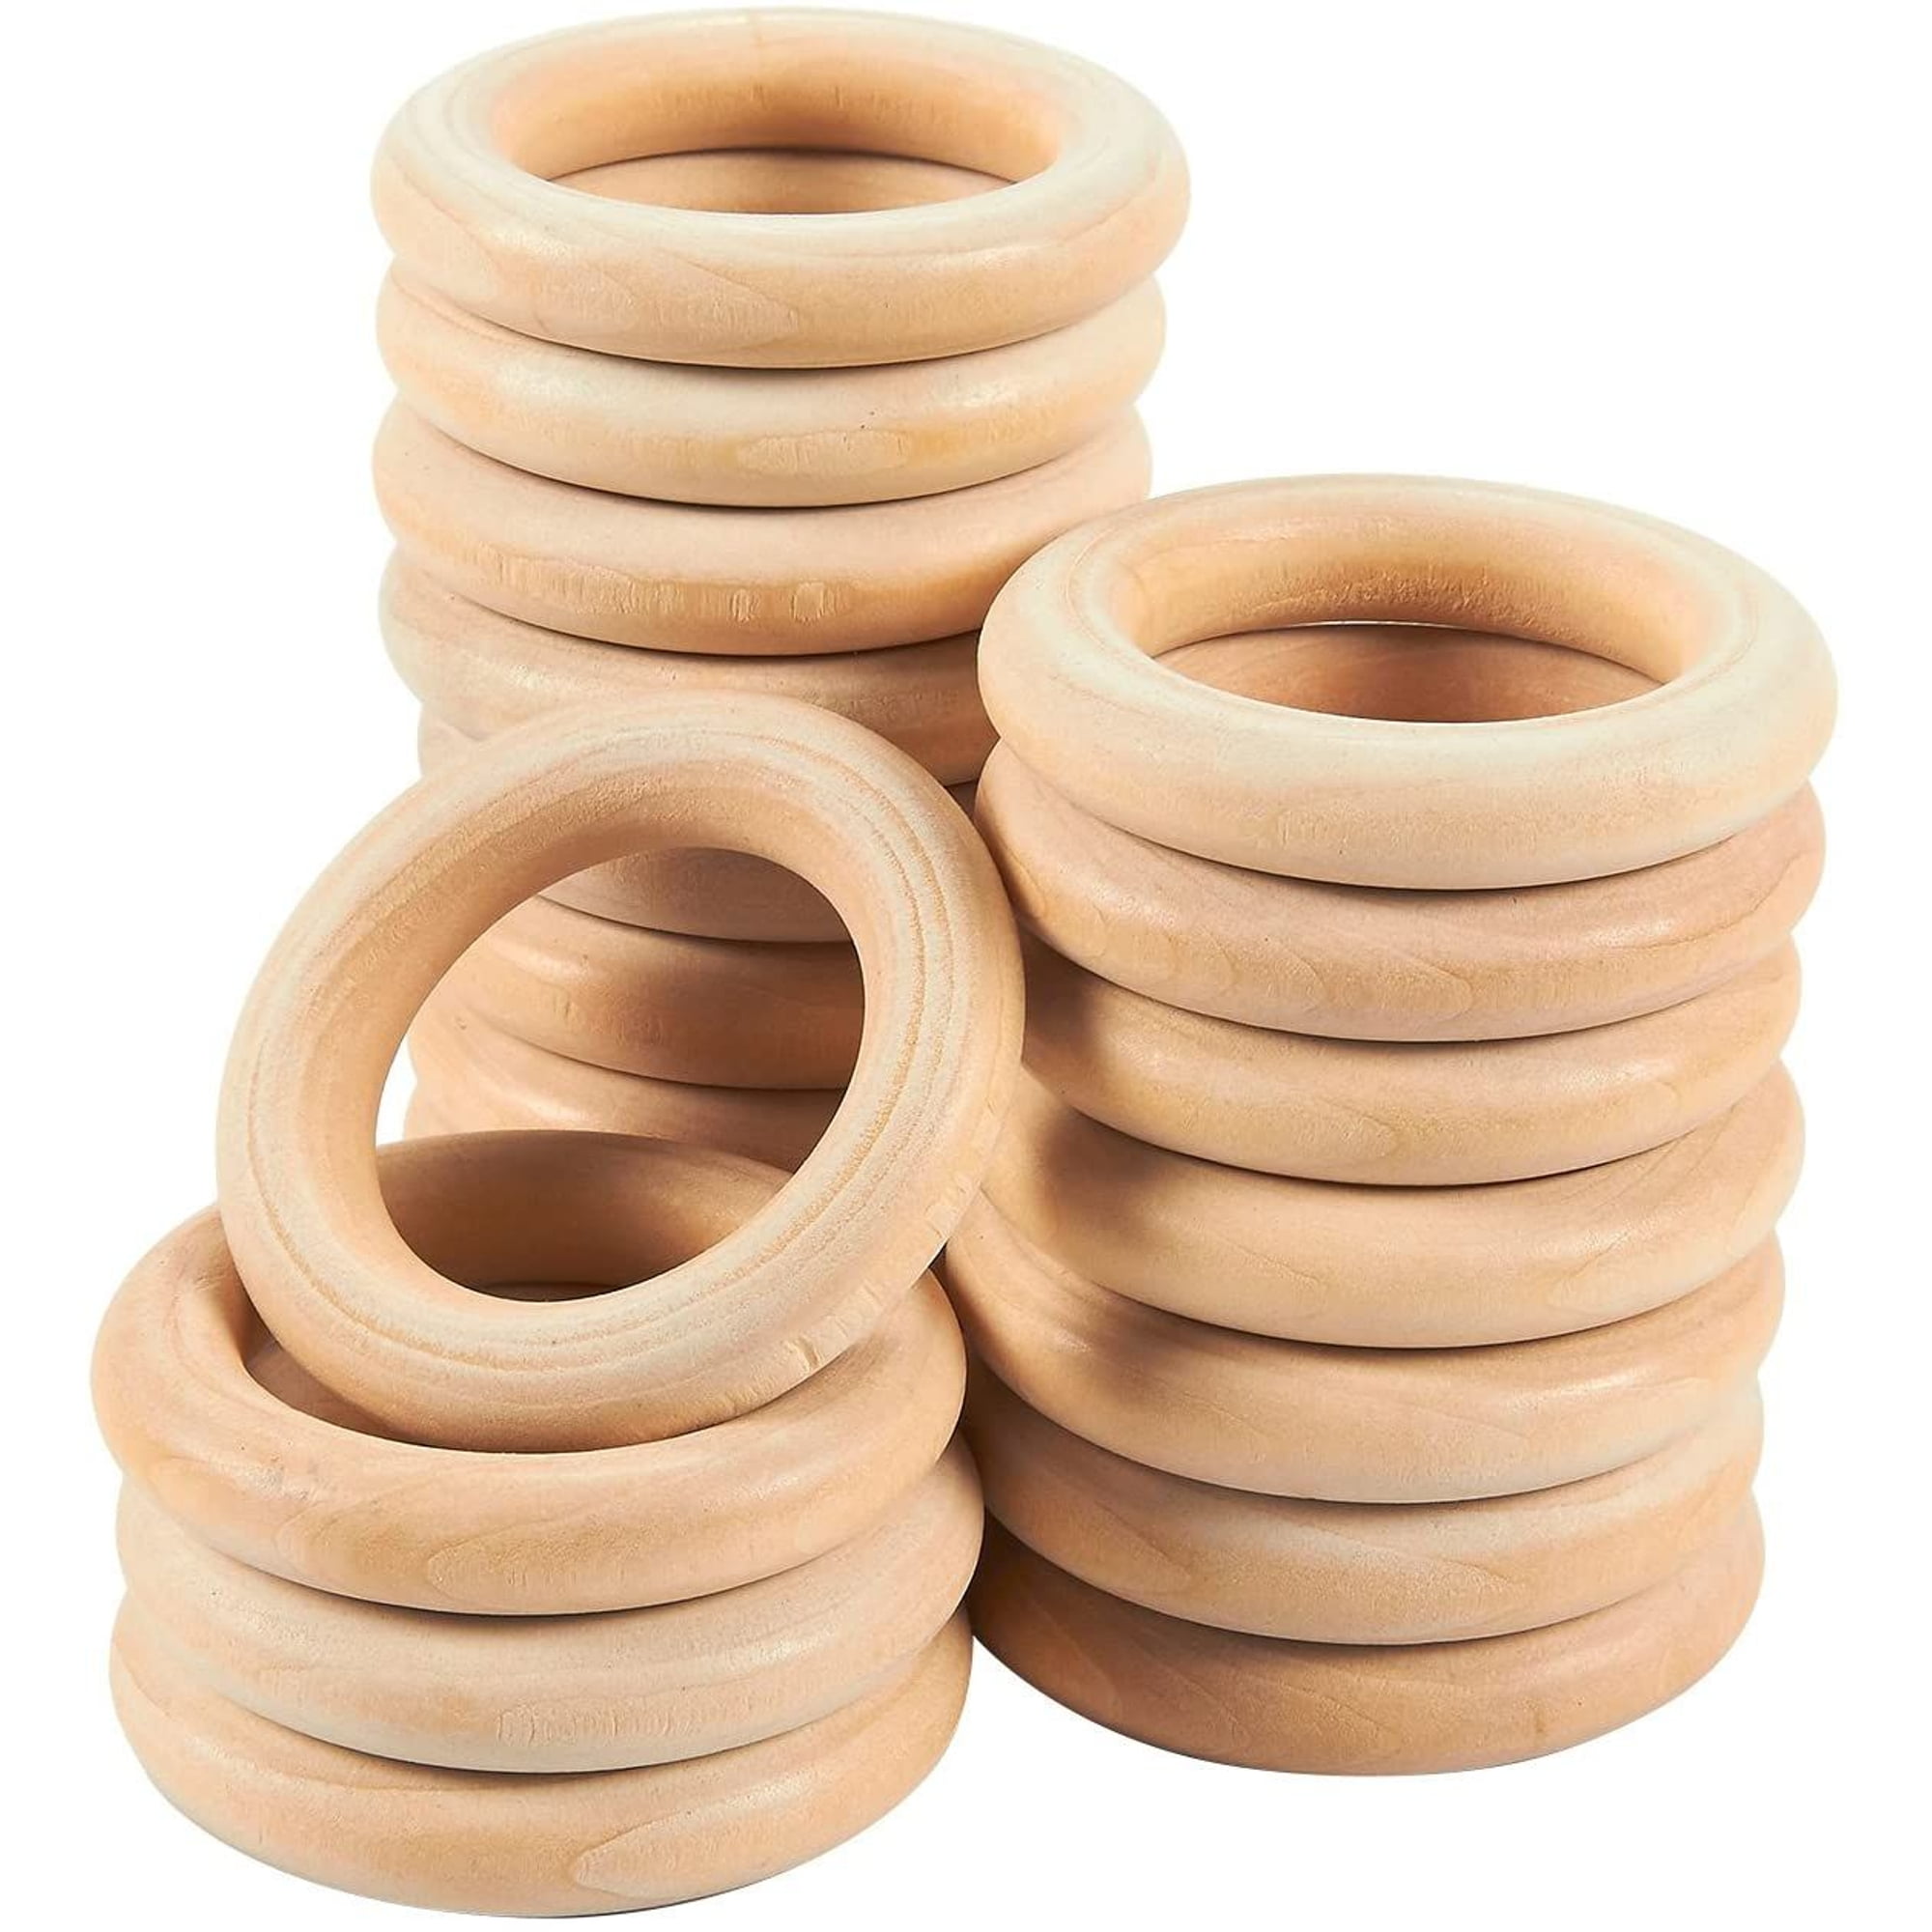 100 Pcs Unfinished Natural Wooden Rings for Crafts, Wood Rings for DIY, Pendant Connectors, Jewelry Making, Macrame Supplies